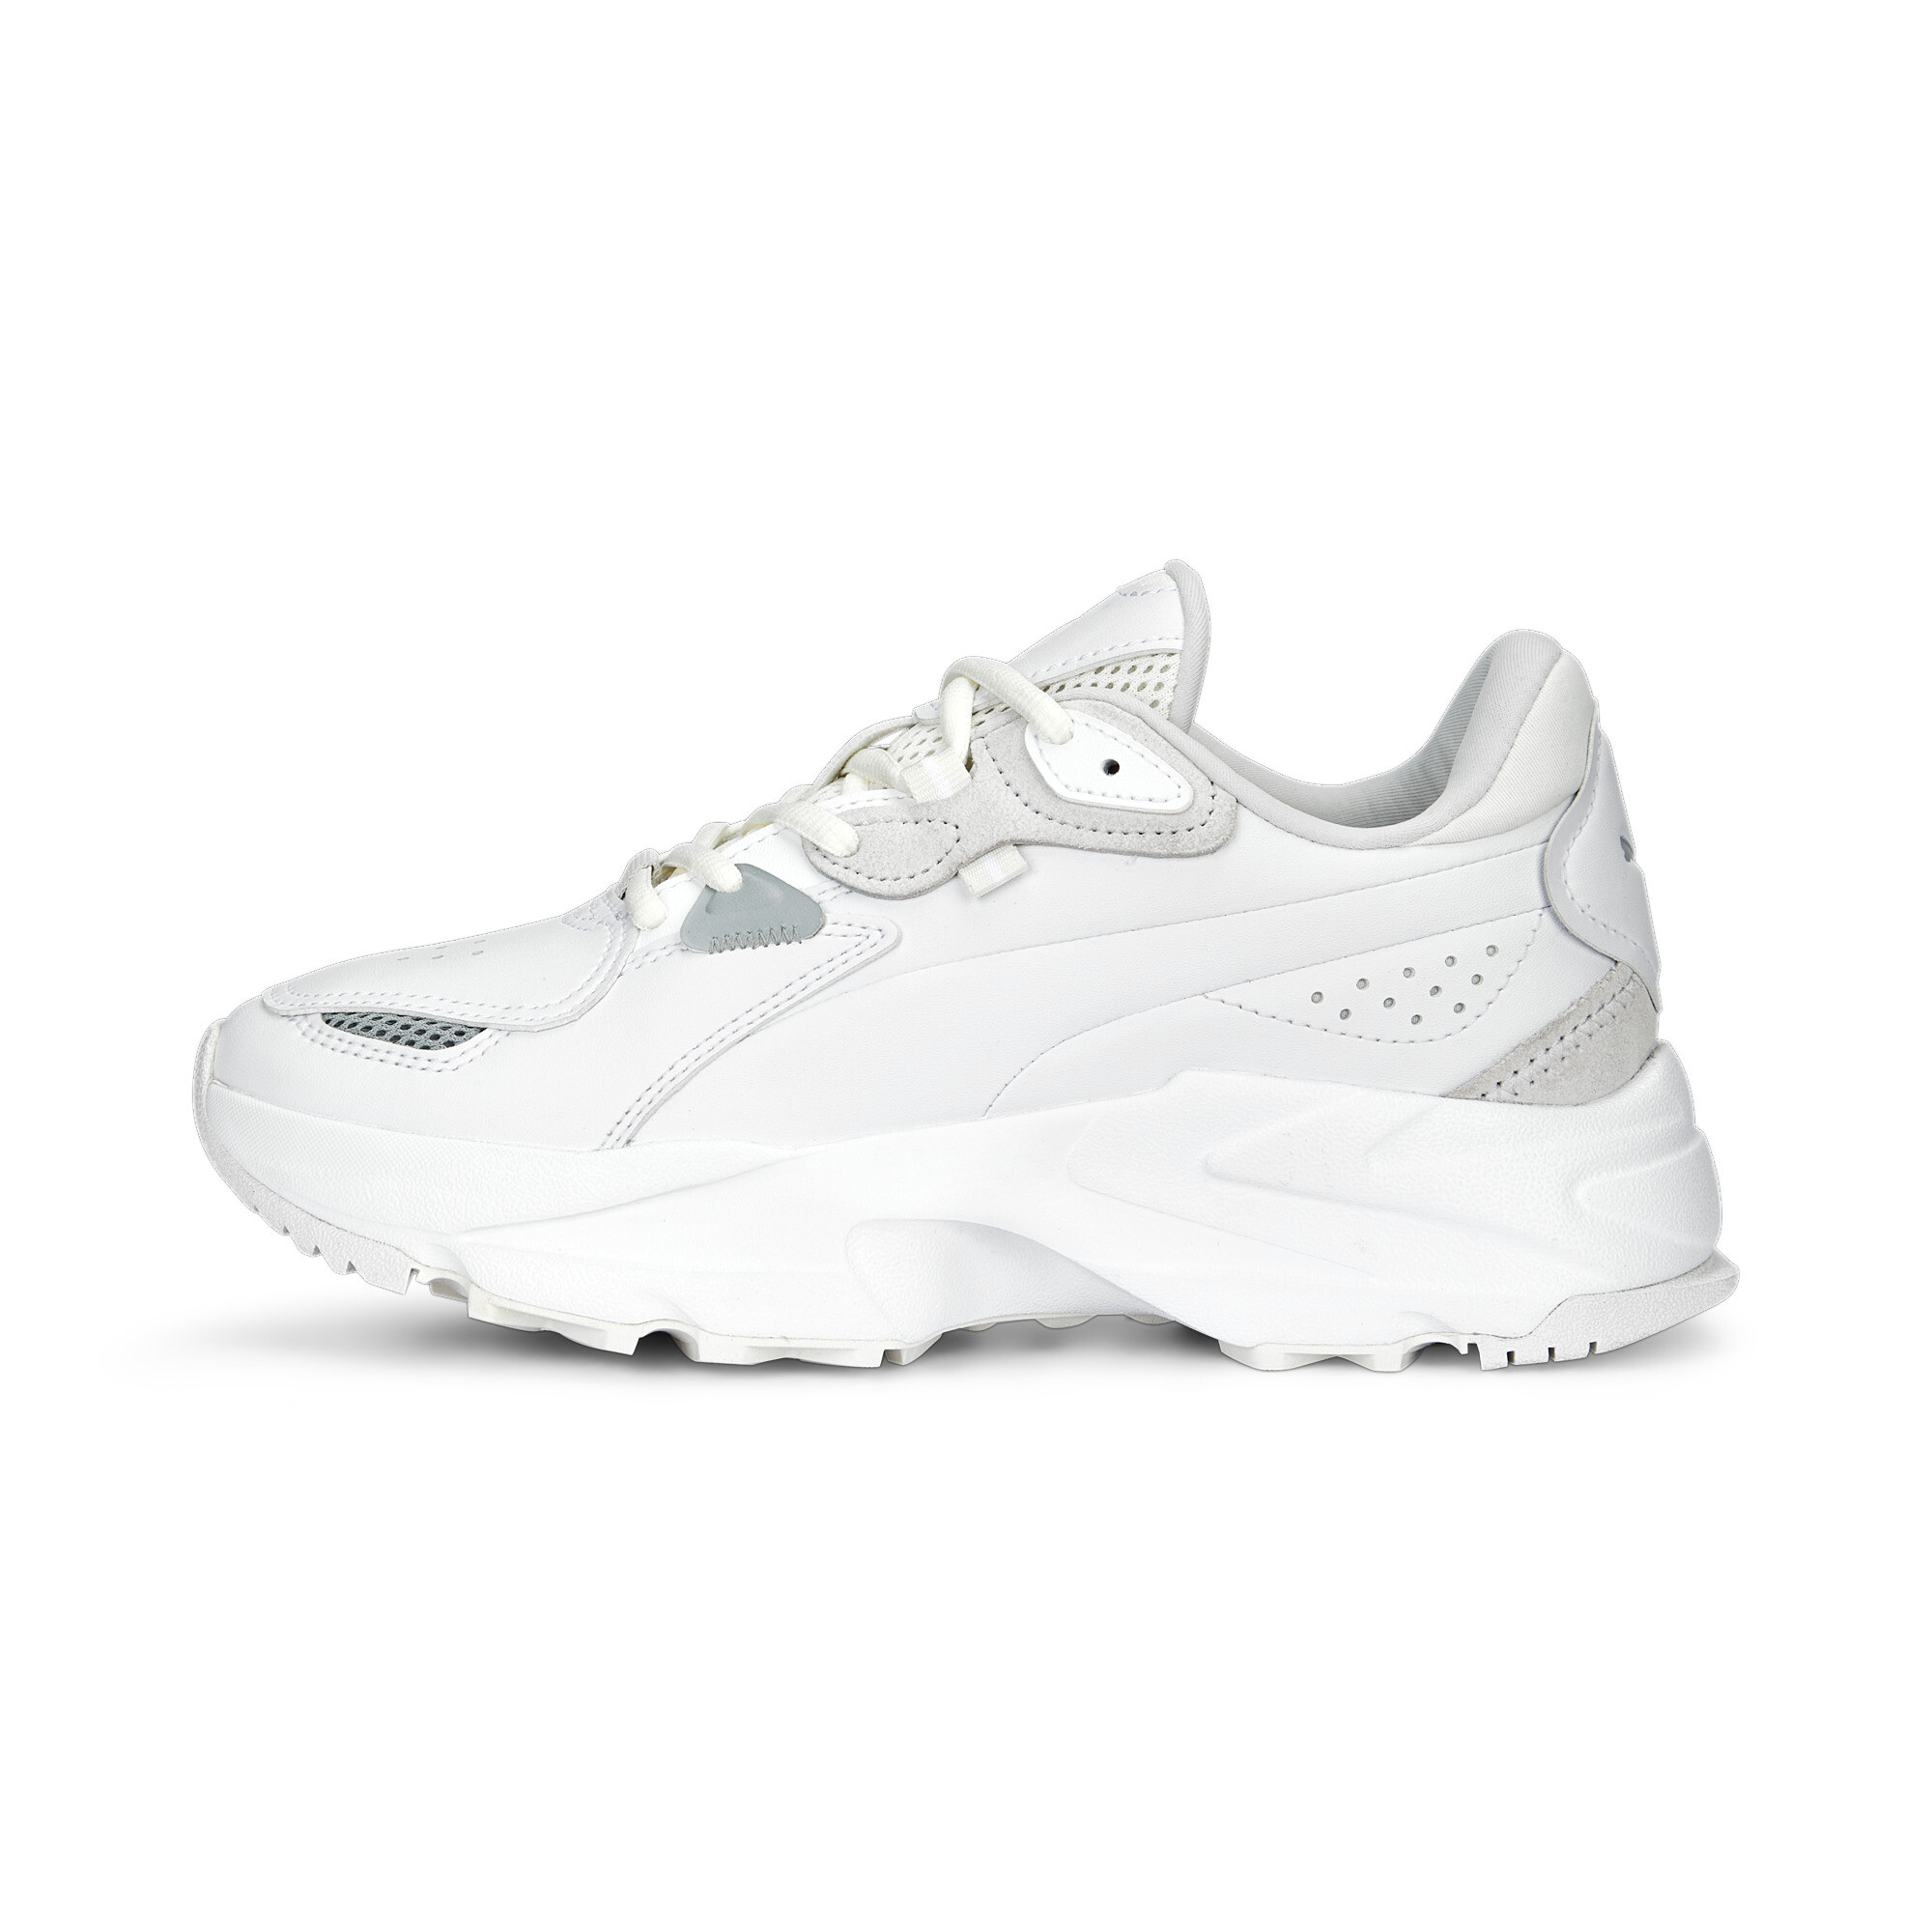 Women's Puma Orkid's Trainers, White, Size 35.5, Shoes